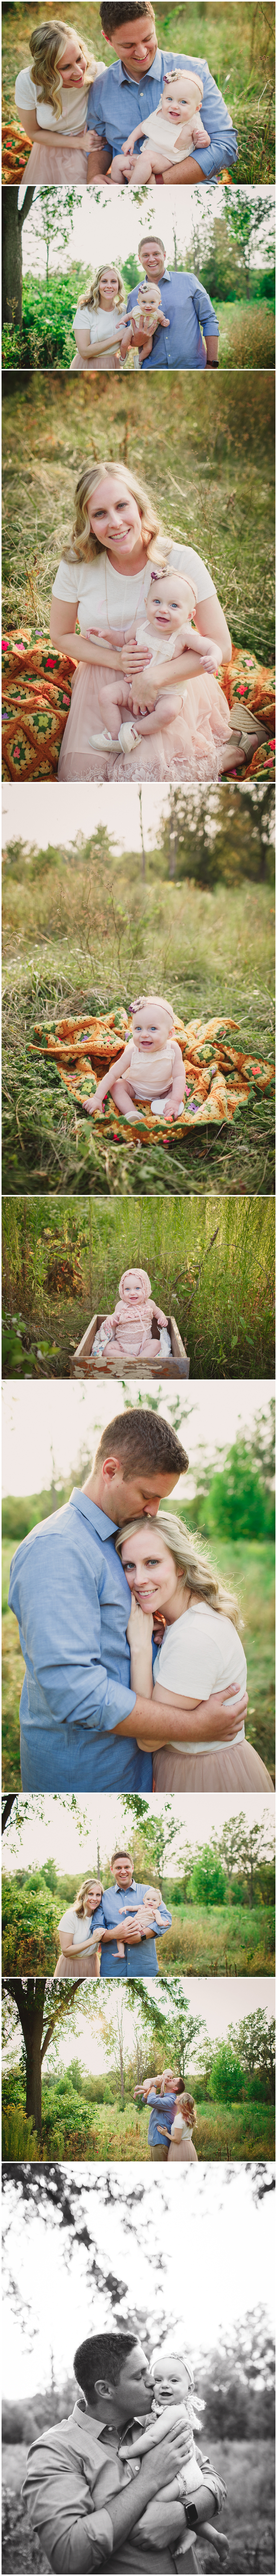 The B Fall Family Mini Session | Chicago Family Photography | Patricia Anderson Photography